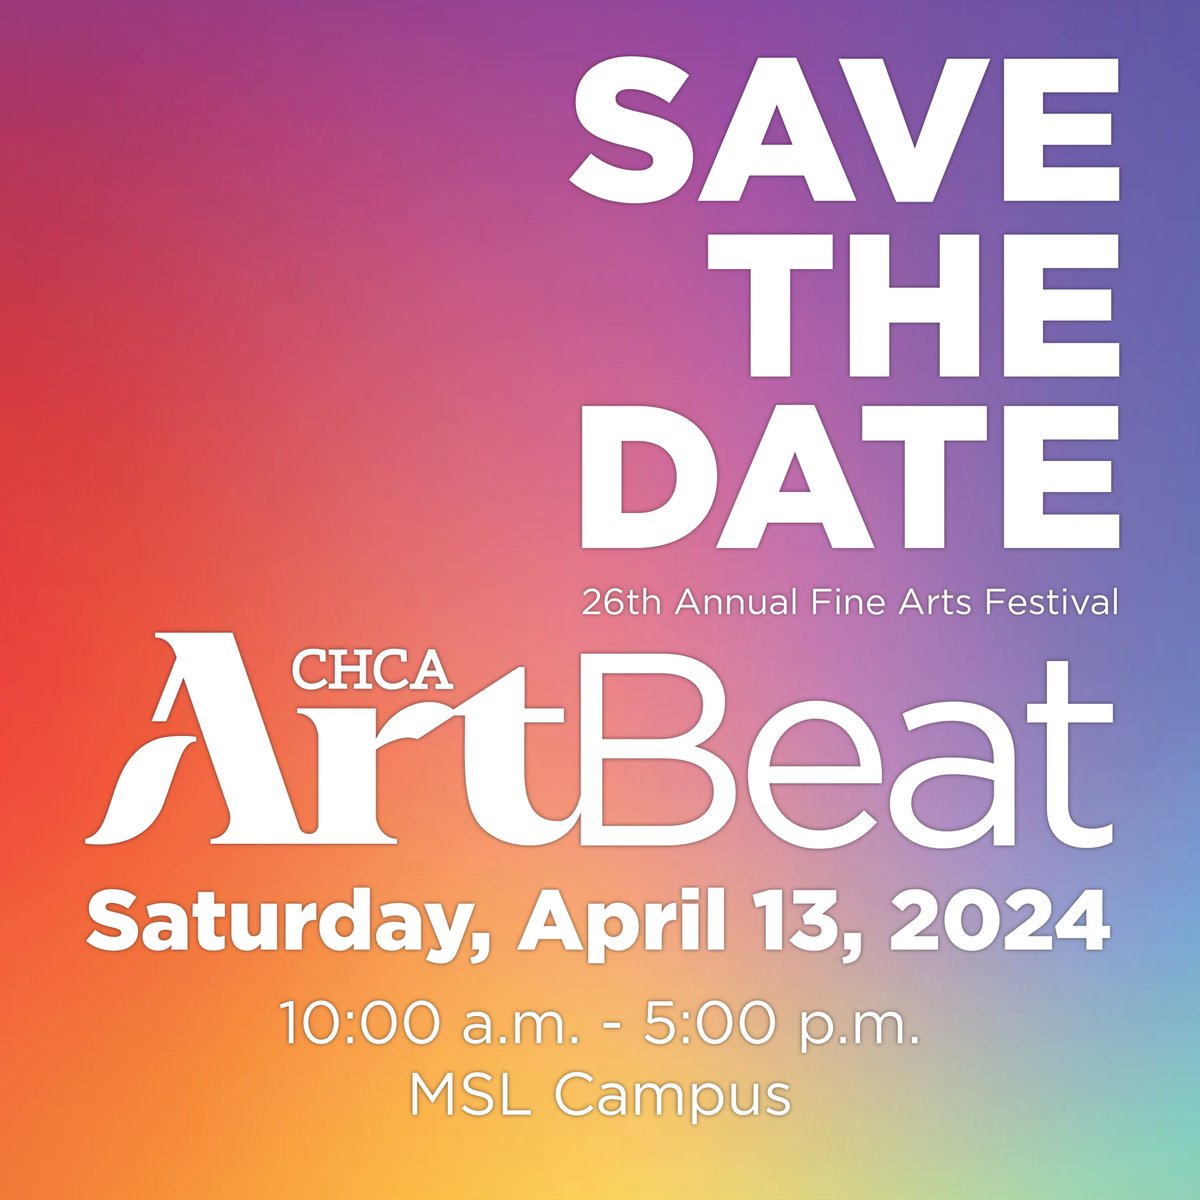 Save the date: ArtBeat returns on April 13! 1,400+ works of art on display, multiple student performances, hands-on-art tables, live demonstrations, and more. For more information, see the ArtBeat page on our website: chca-oh.org/arts/artbeat #GoCHCA #ArtBeat2024